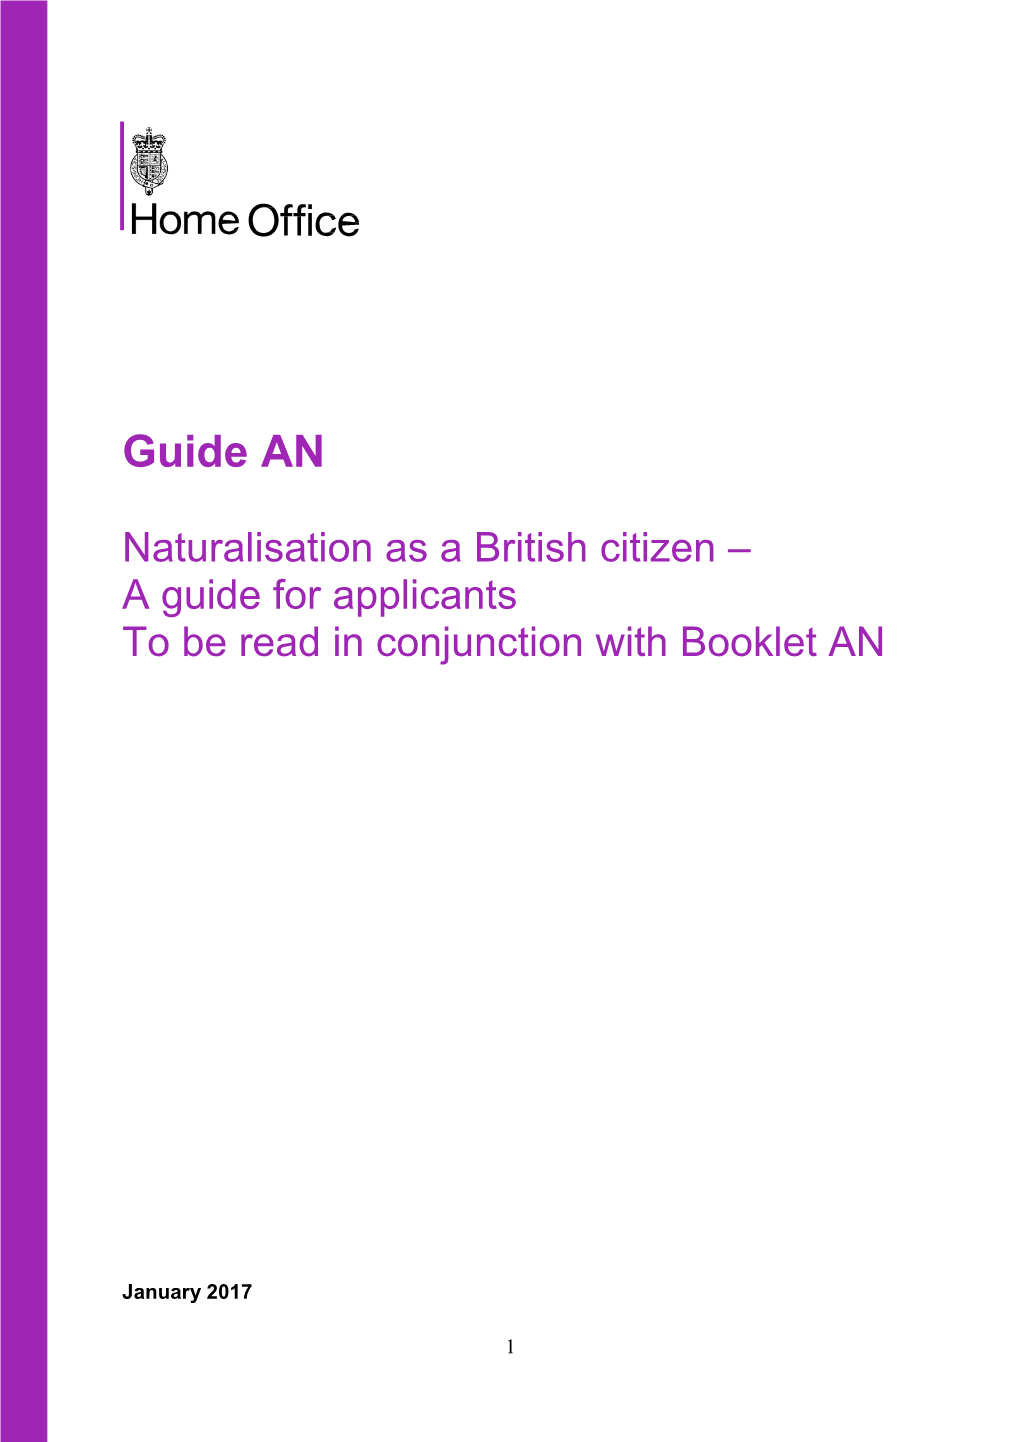 Naturalisation As a British Citizen – a Guide for Applicants to Be Read in Conjunction with Booklet AN